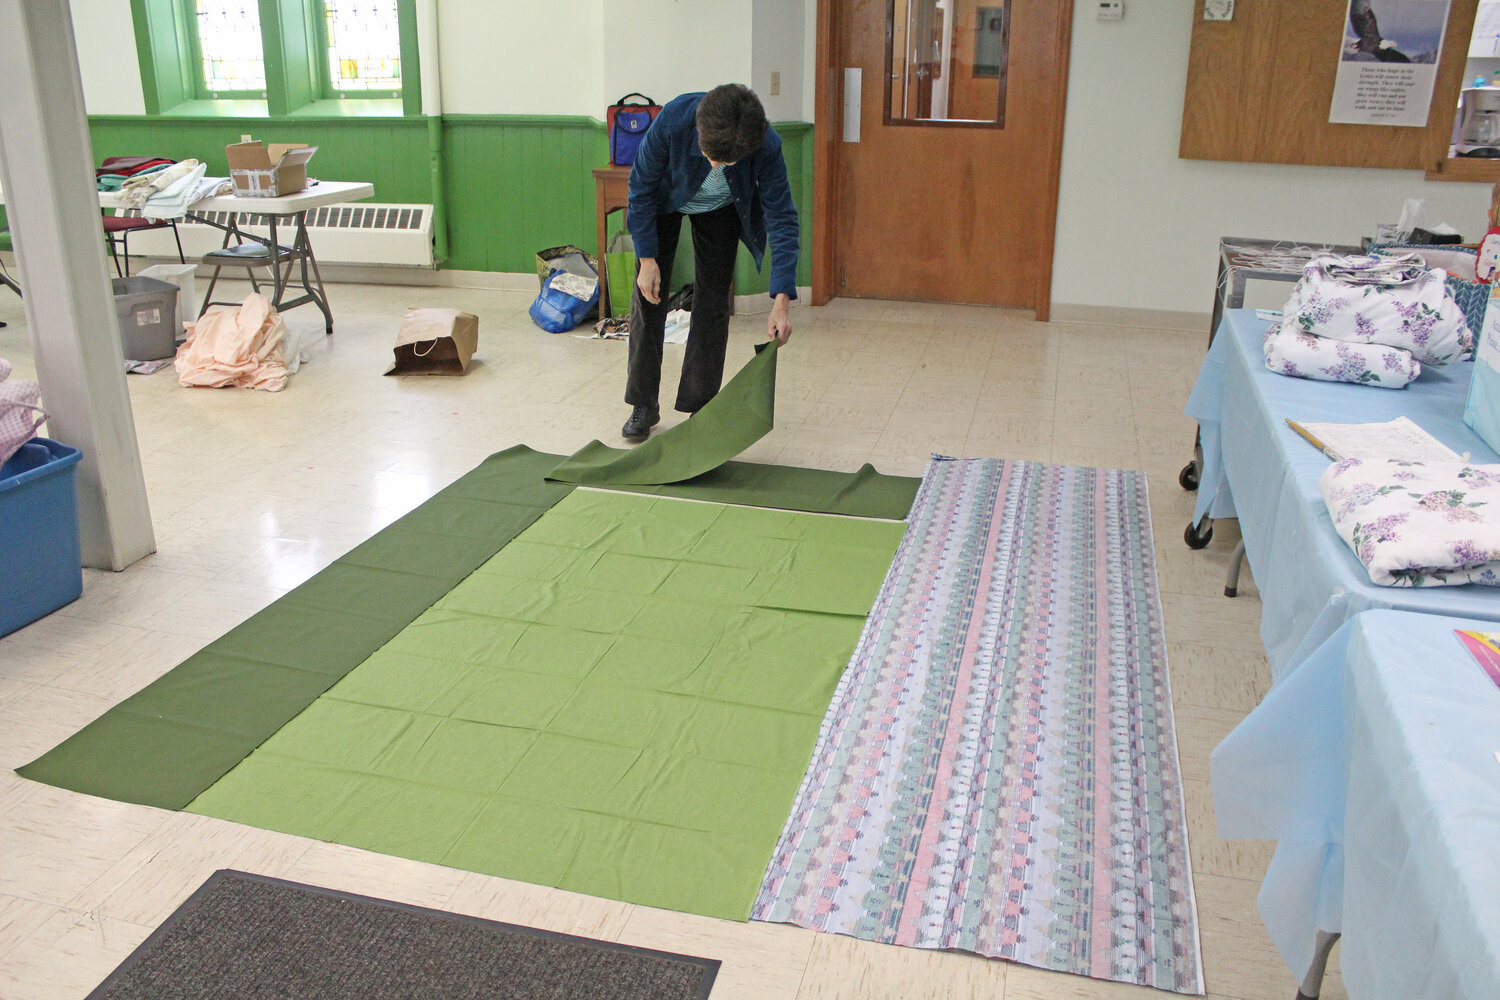 Markings on the floor at Dryden United Methodist Church help measure the fabric to create the sleeping bags' outer layers.